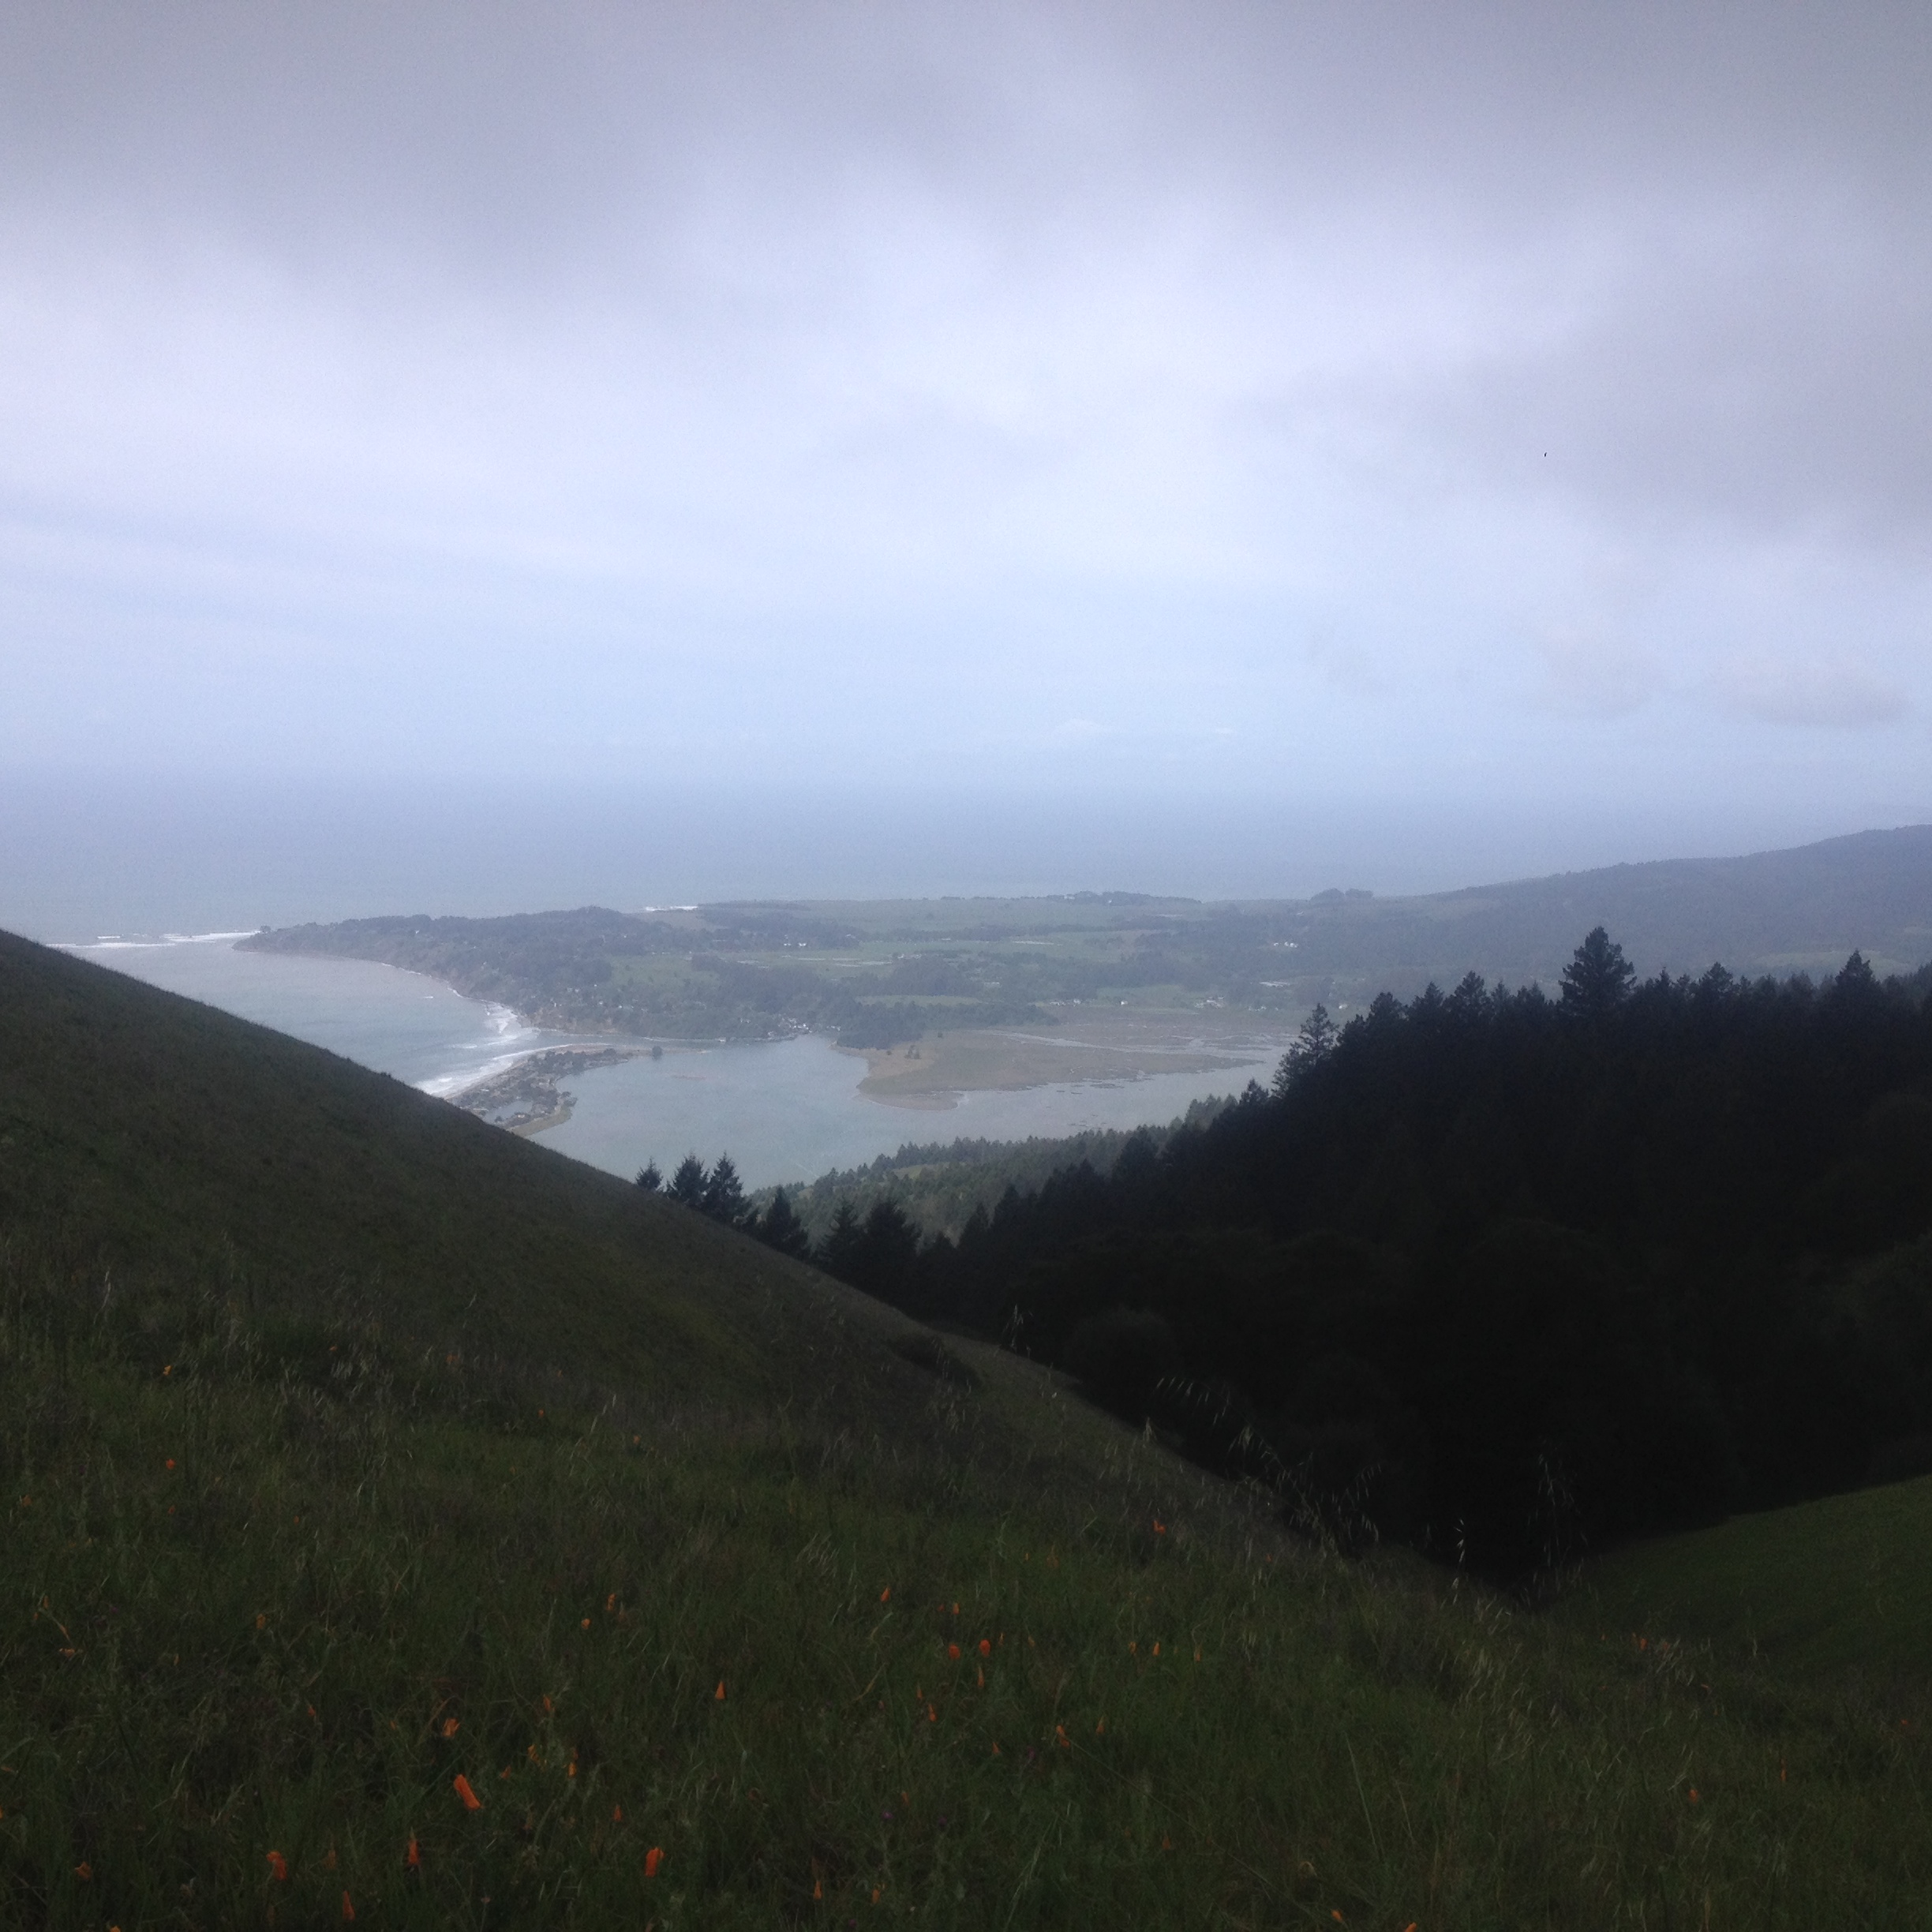 Stinson Beach, Another Perspective